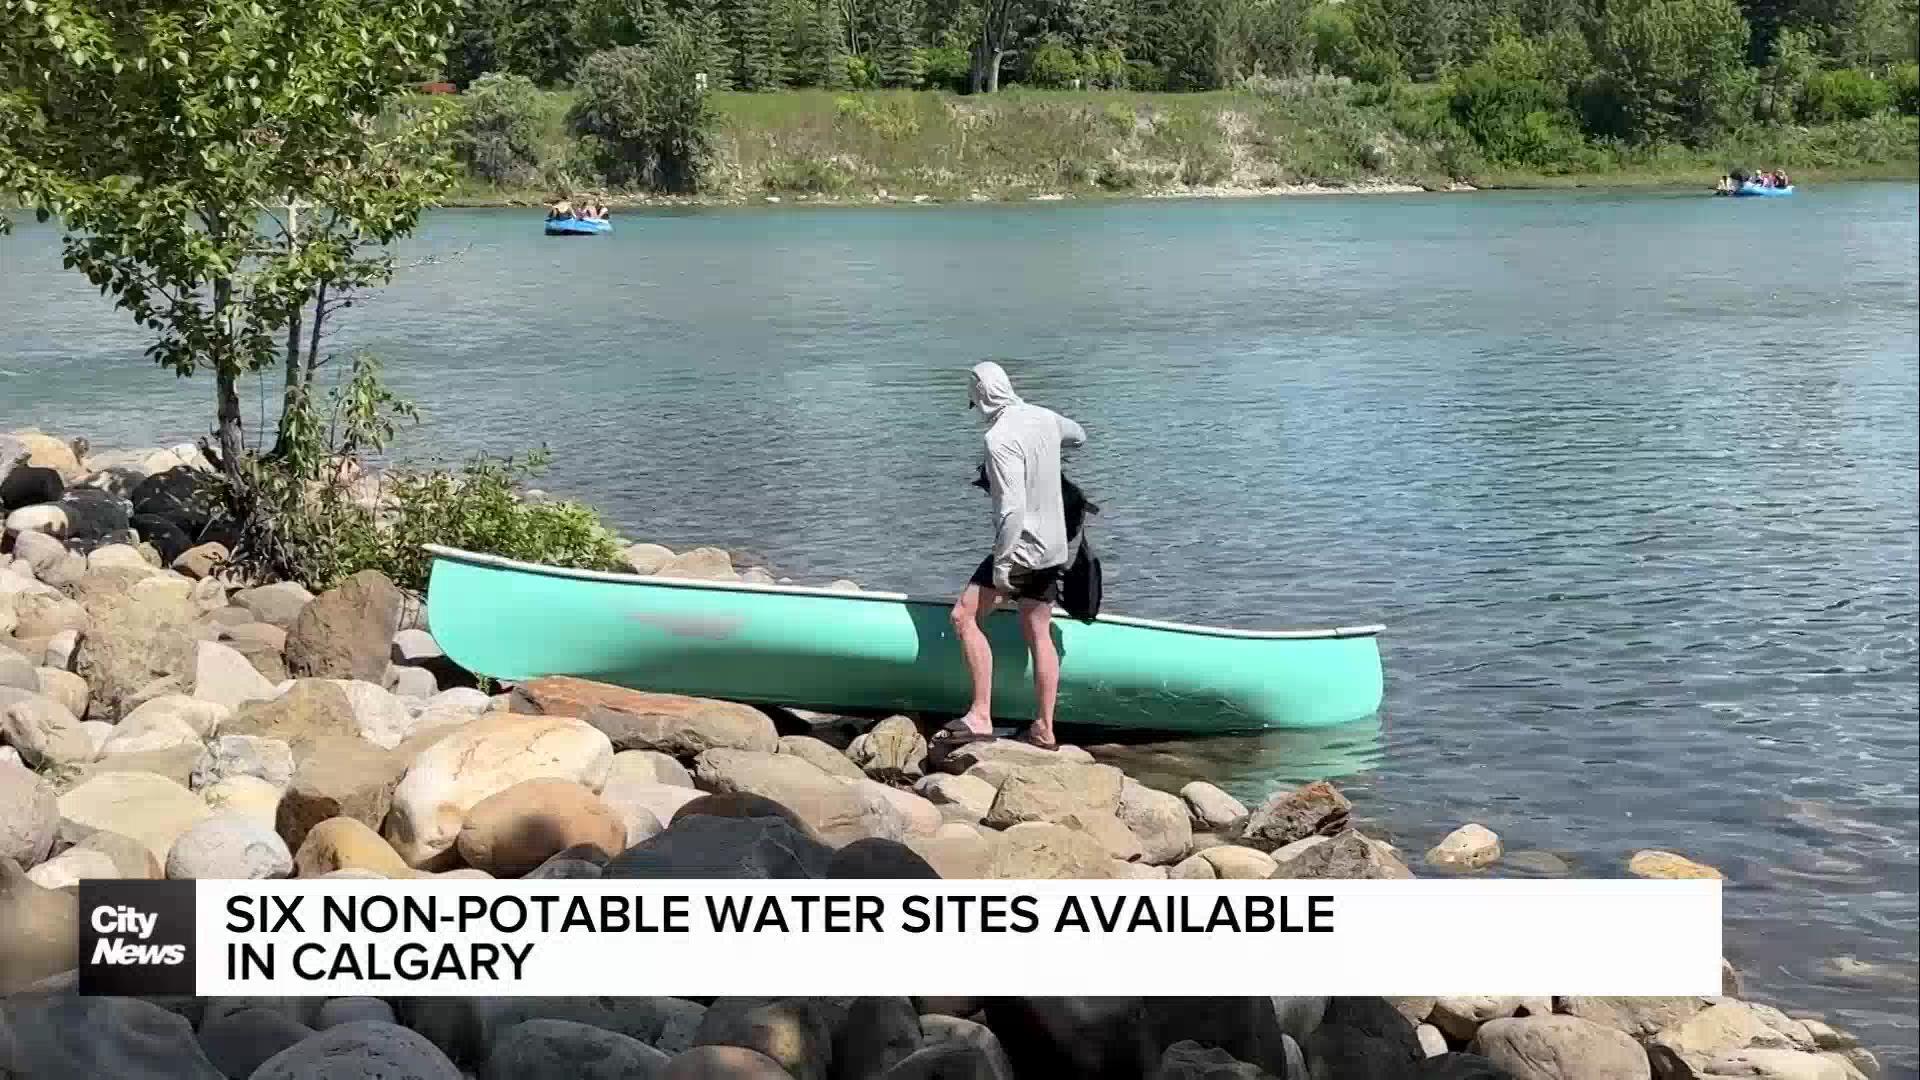 City of Calgary offers non-potable water spots